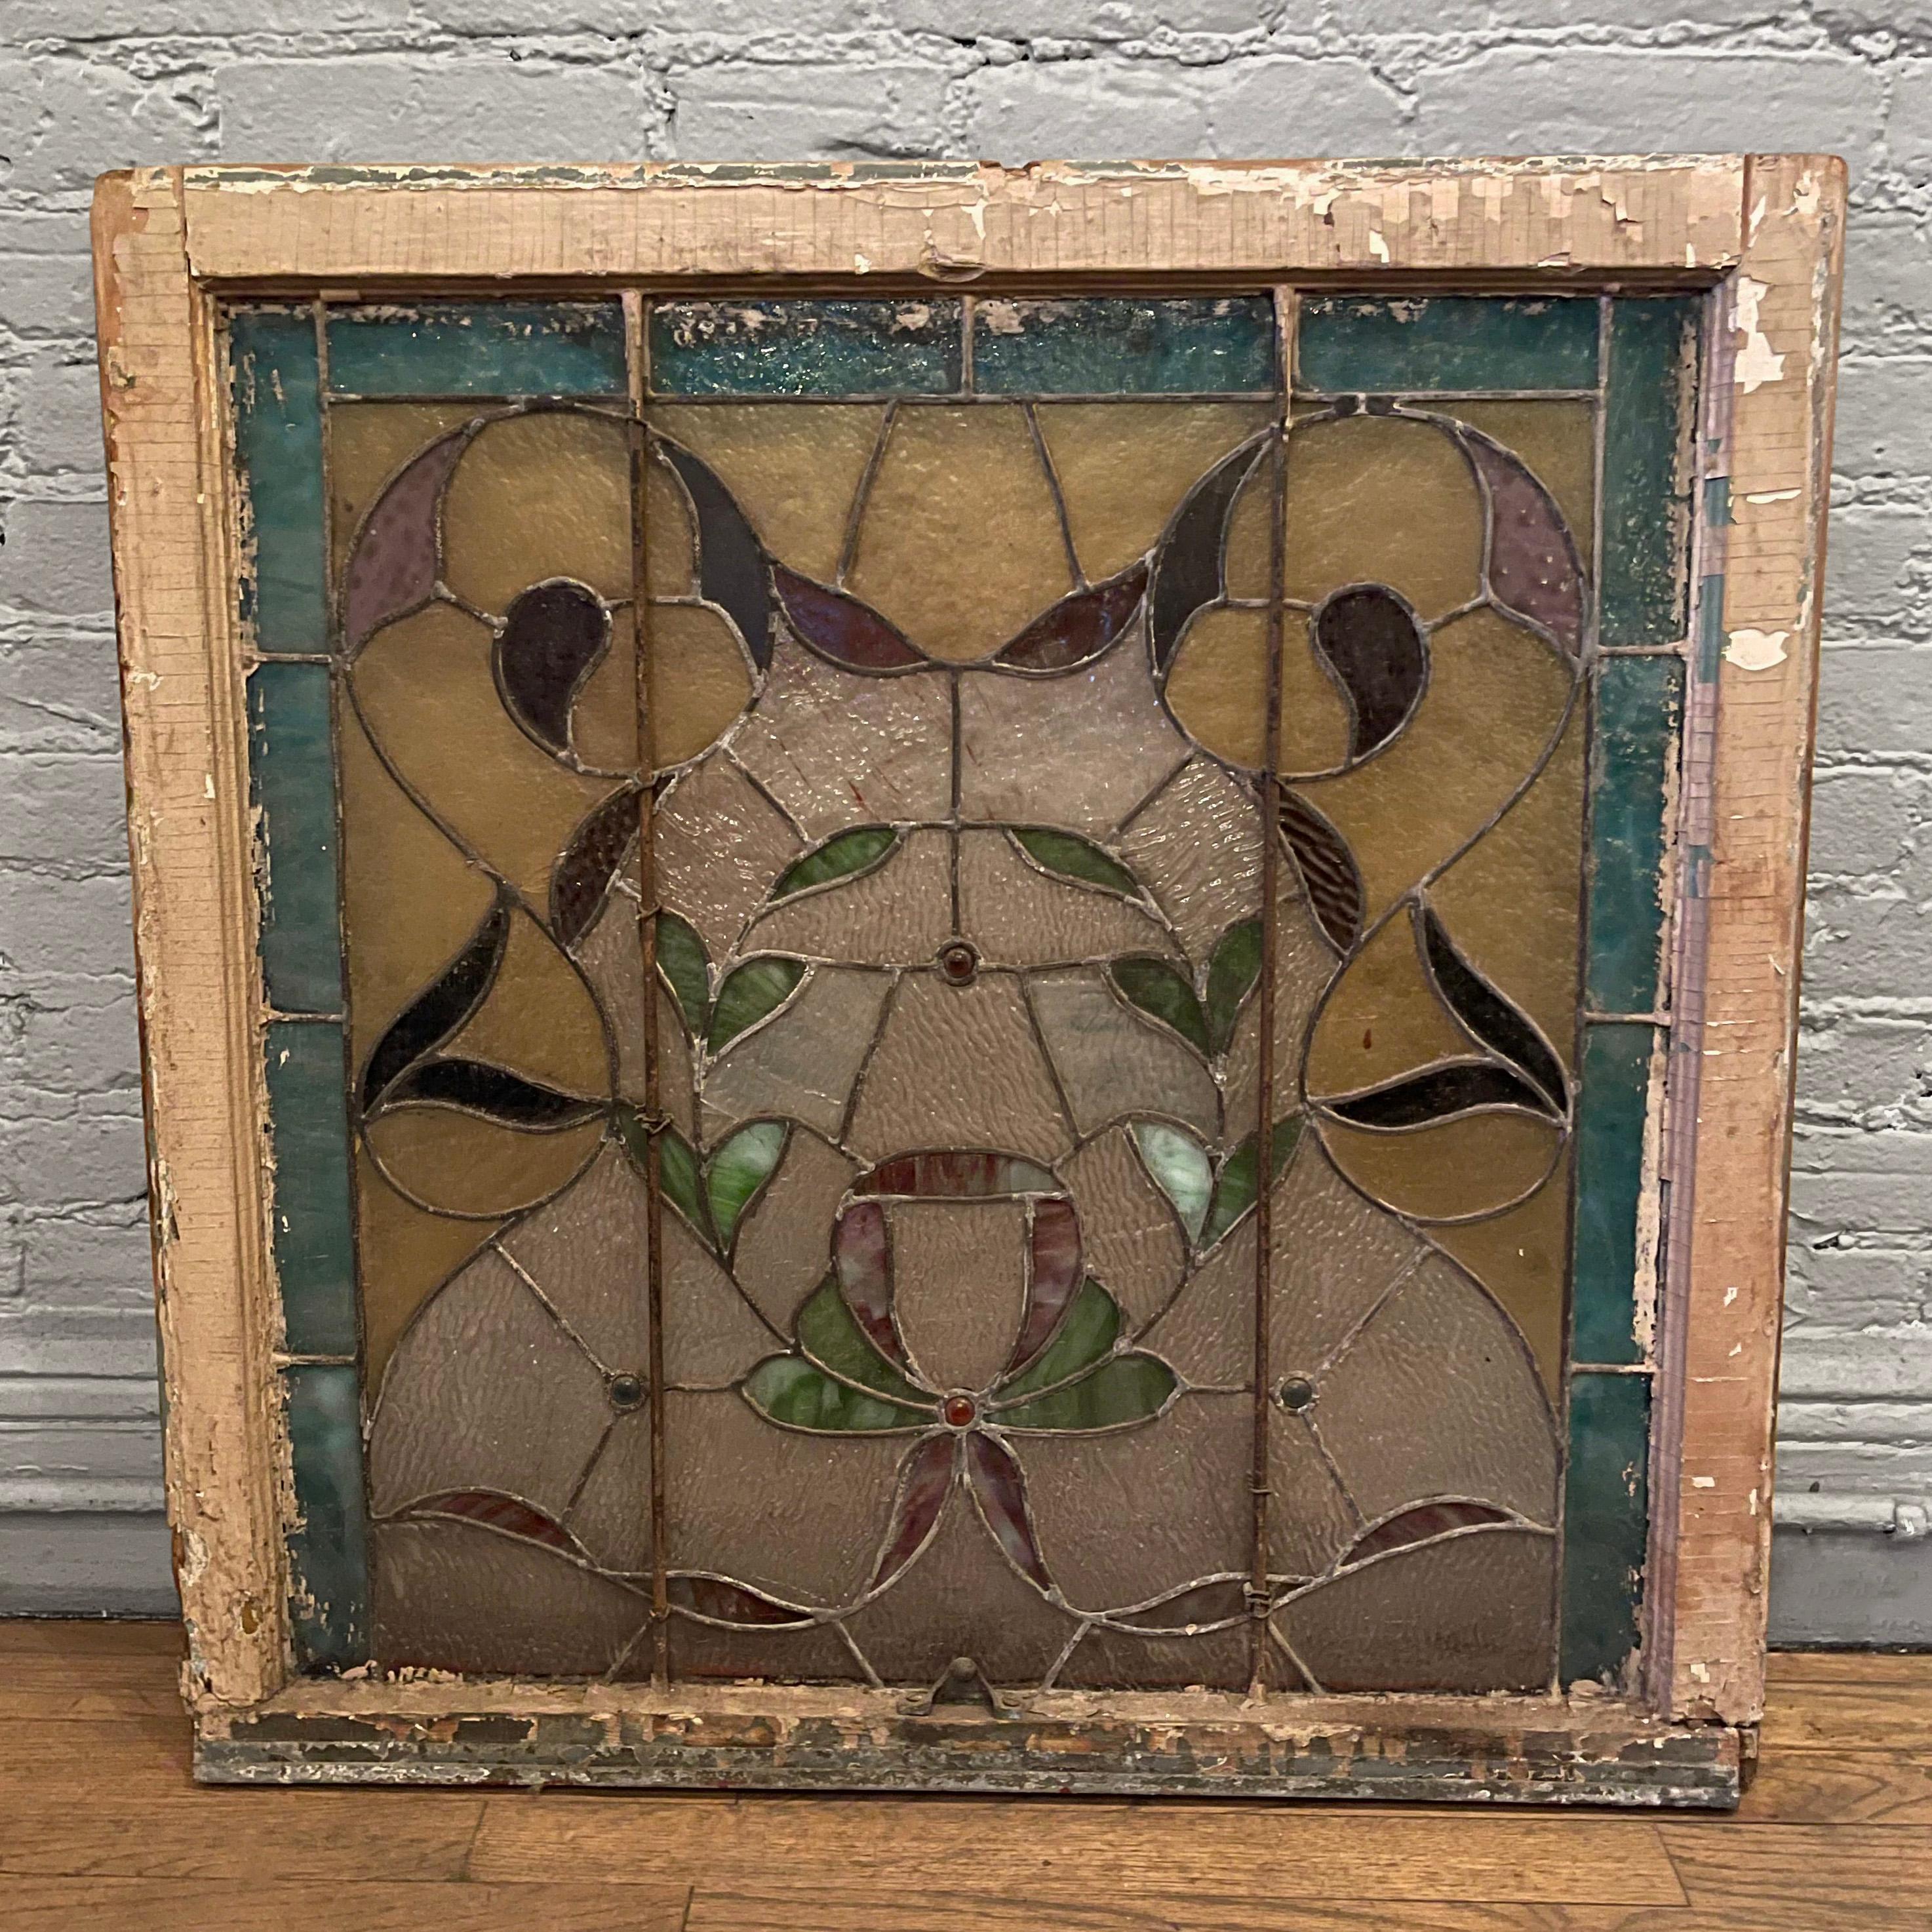 20th Century Arts & Crafts Stained Glass Window Panel